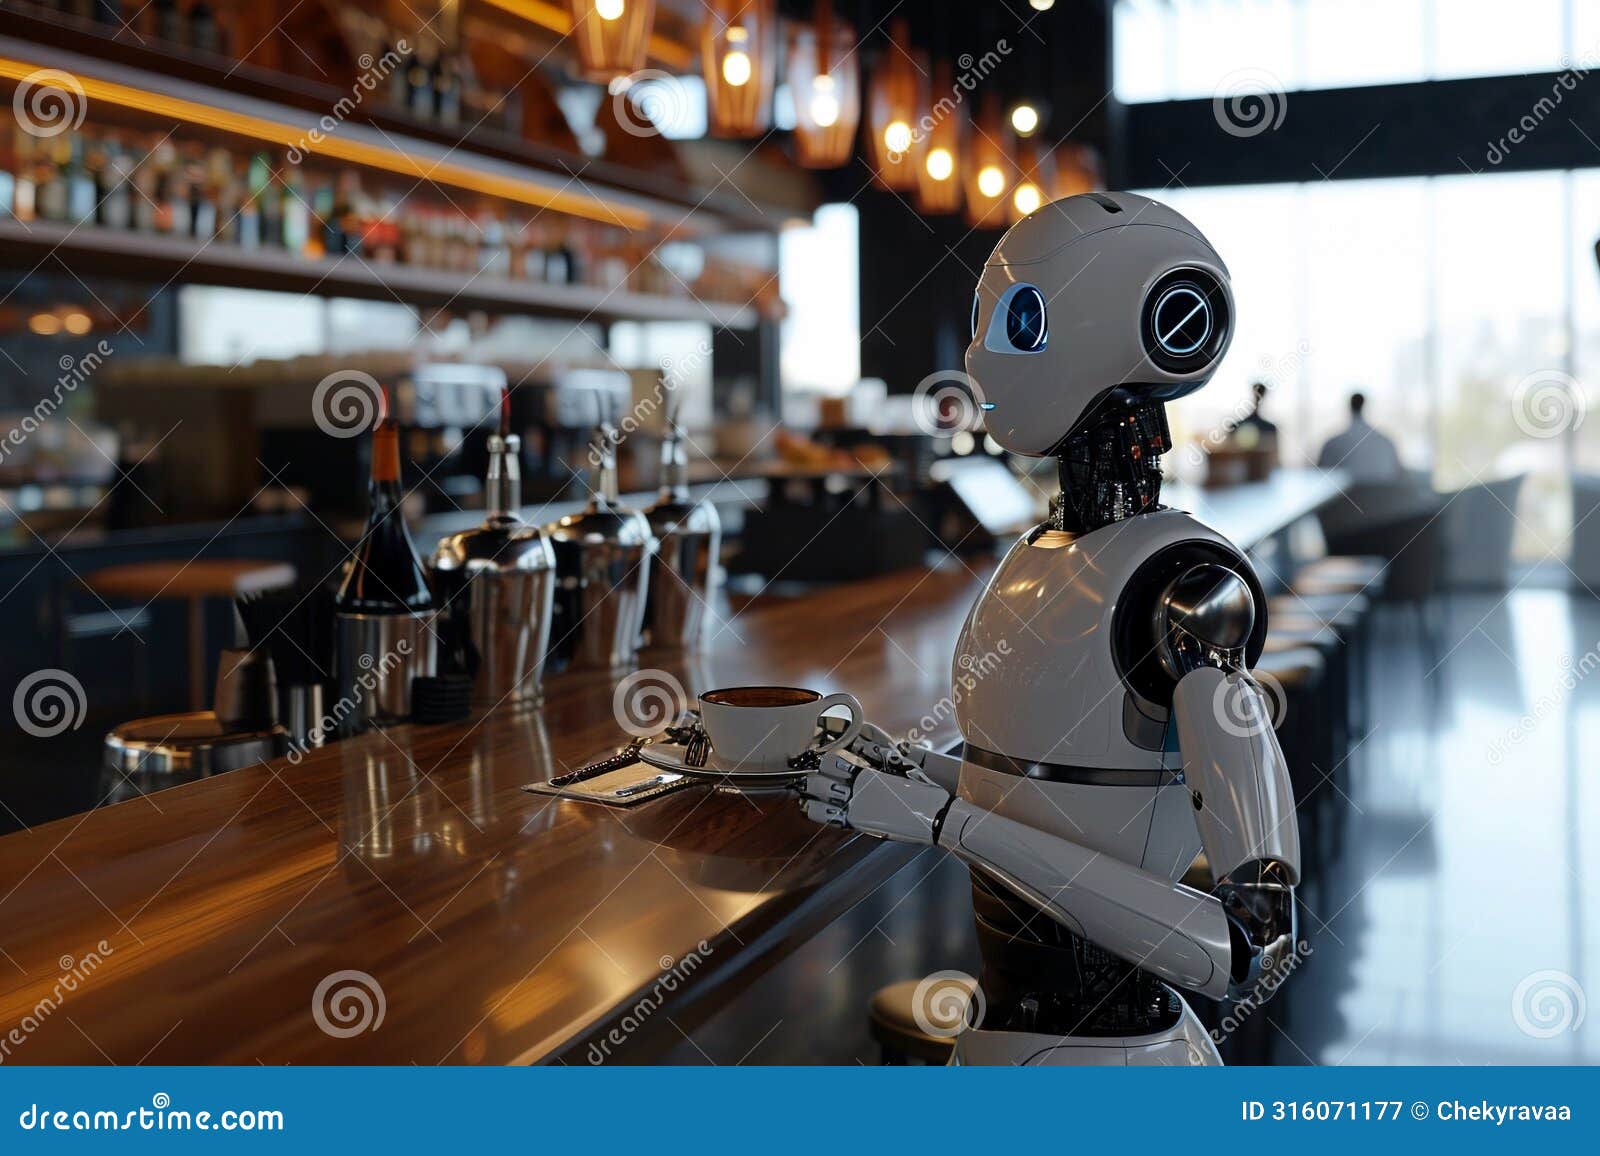 robot works as a waiter in the modern nice cafe, blurred background. artificial intelect in future life